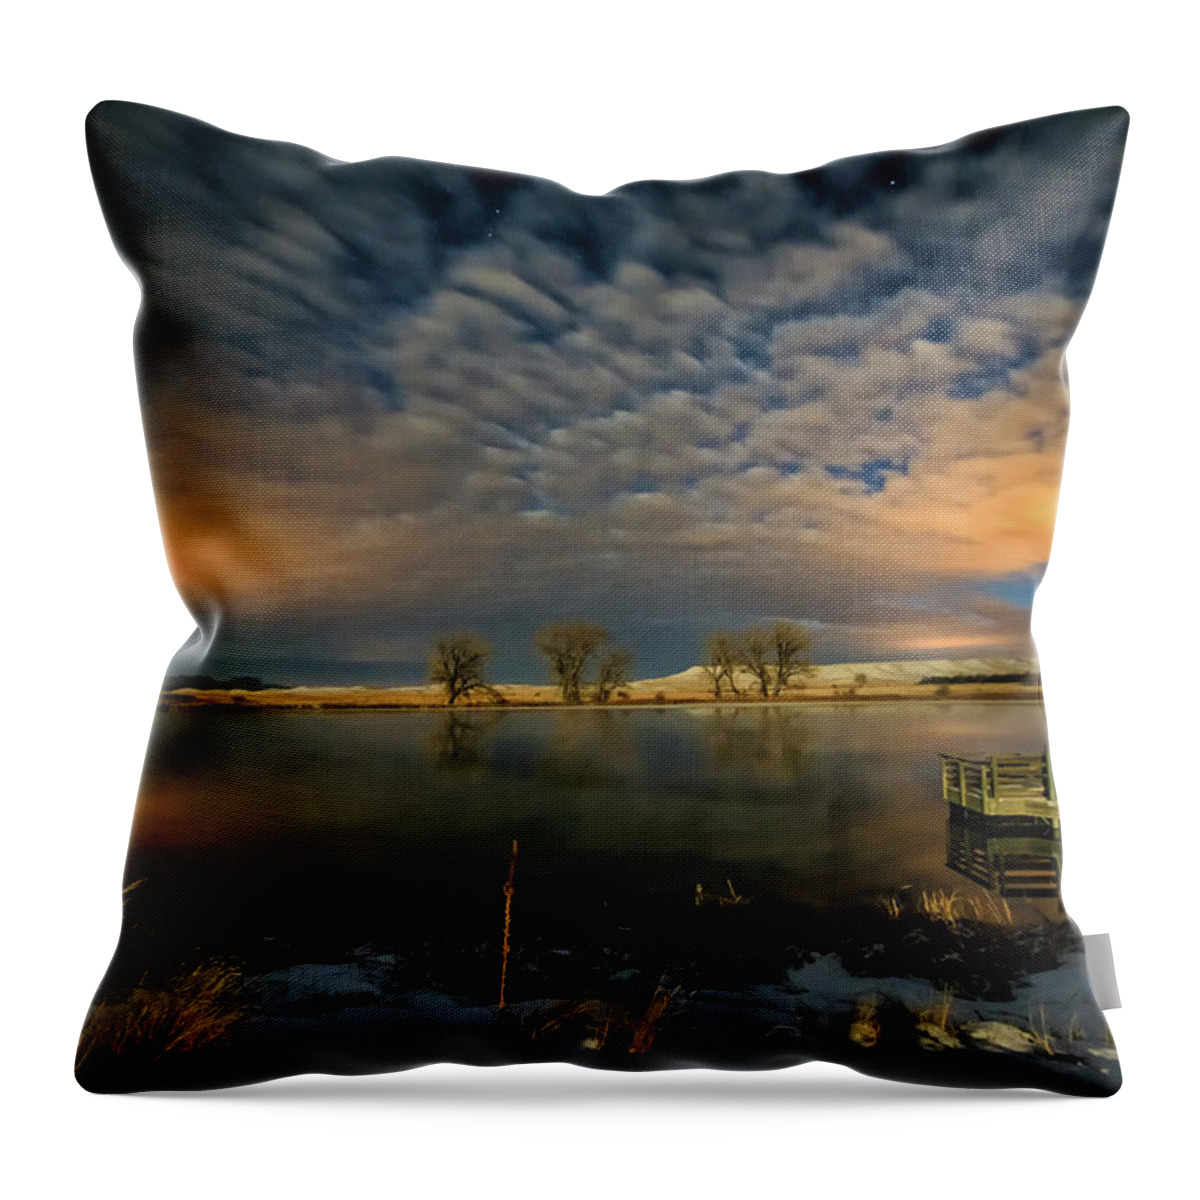 Pond Fishing_hole Night Stars Landscape Throw Pillow featuring the photograph Fishing Hole at Night by Fiskr Larsen